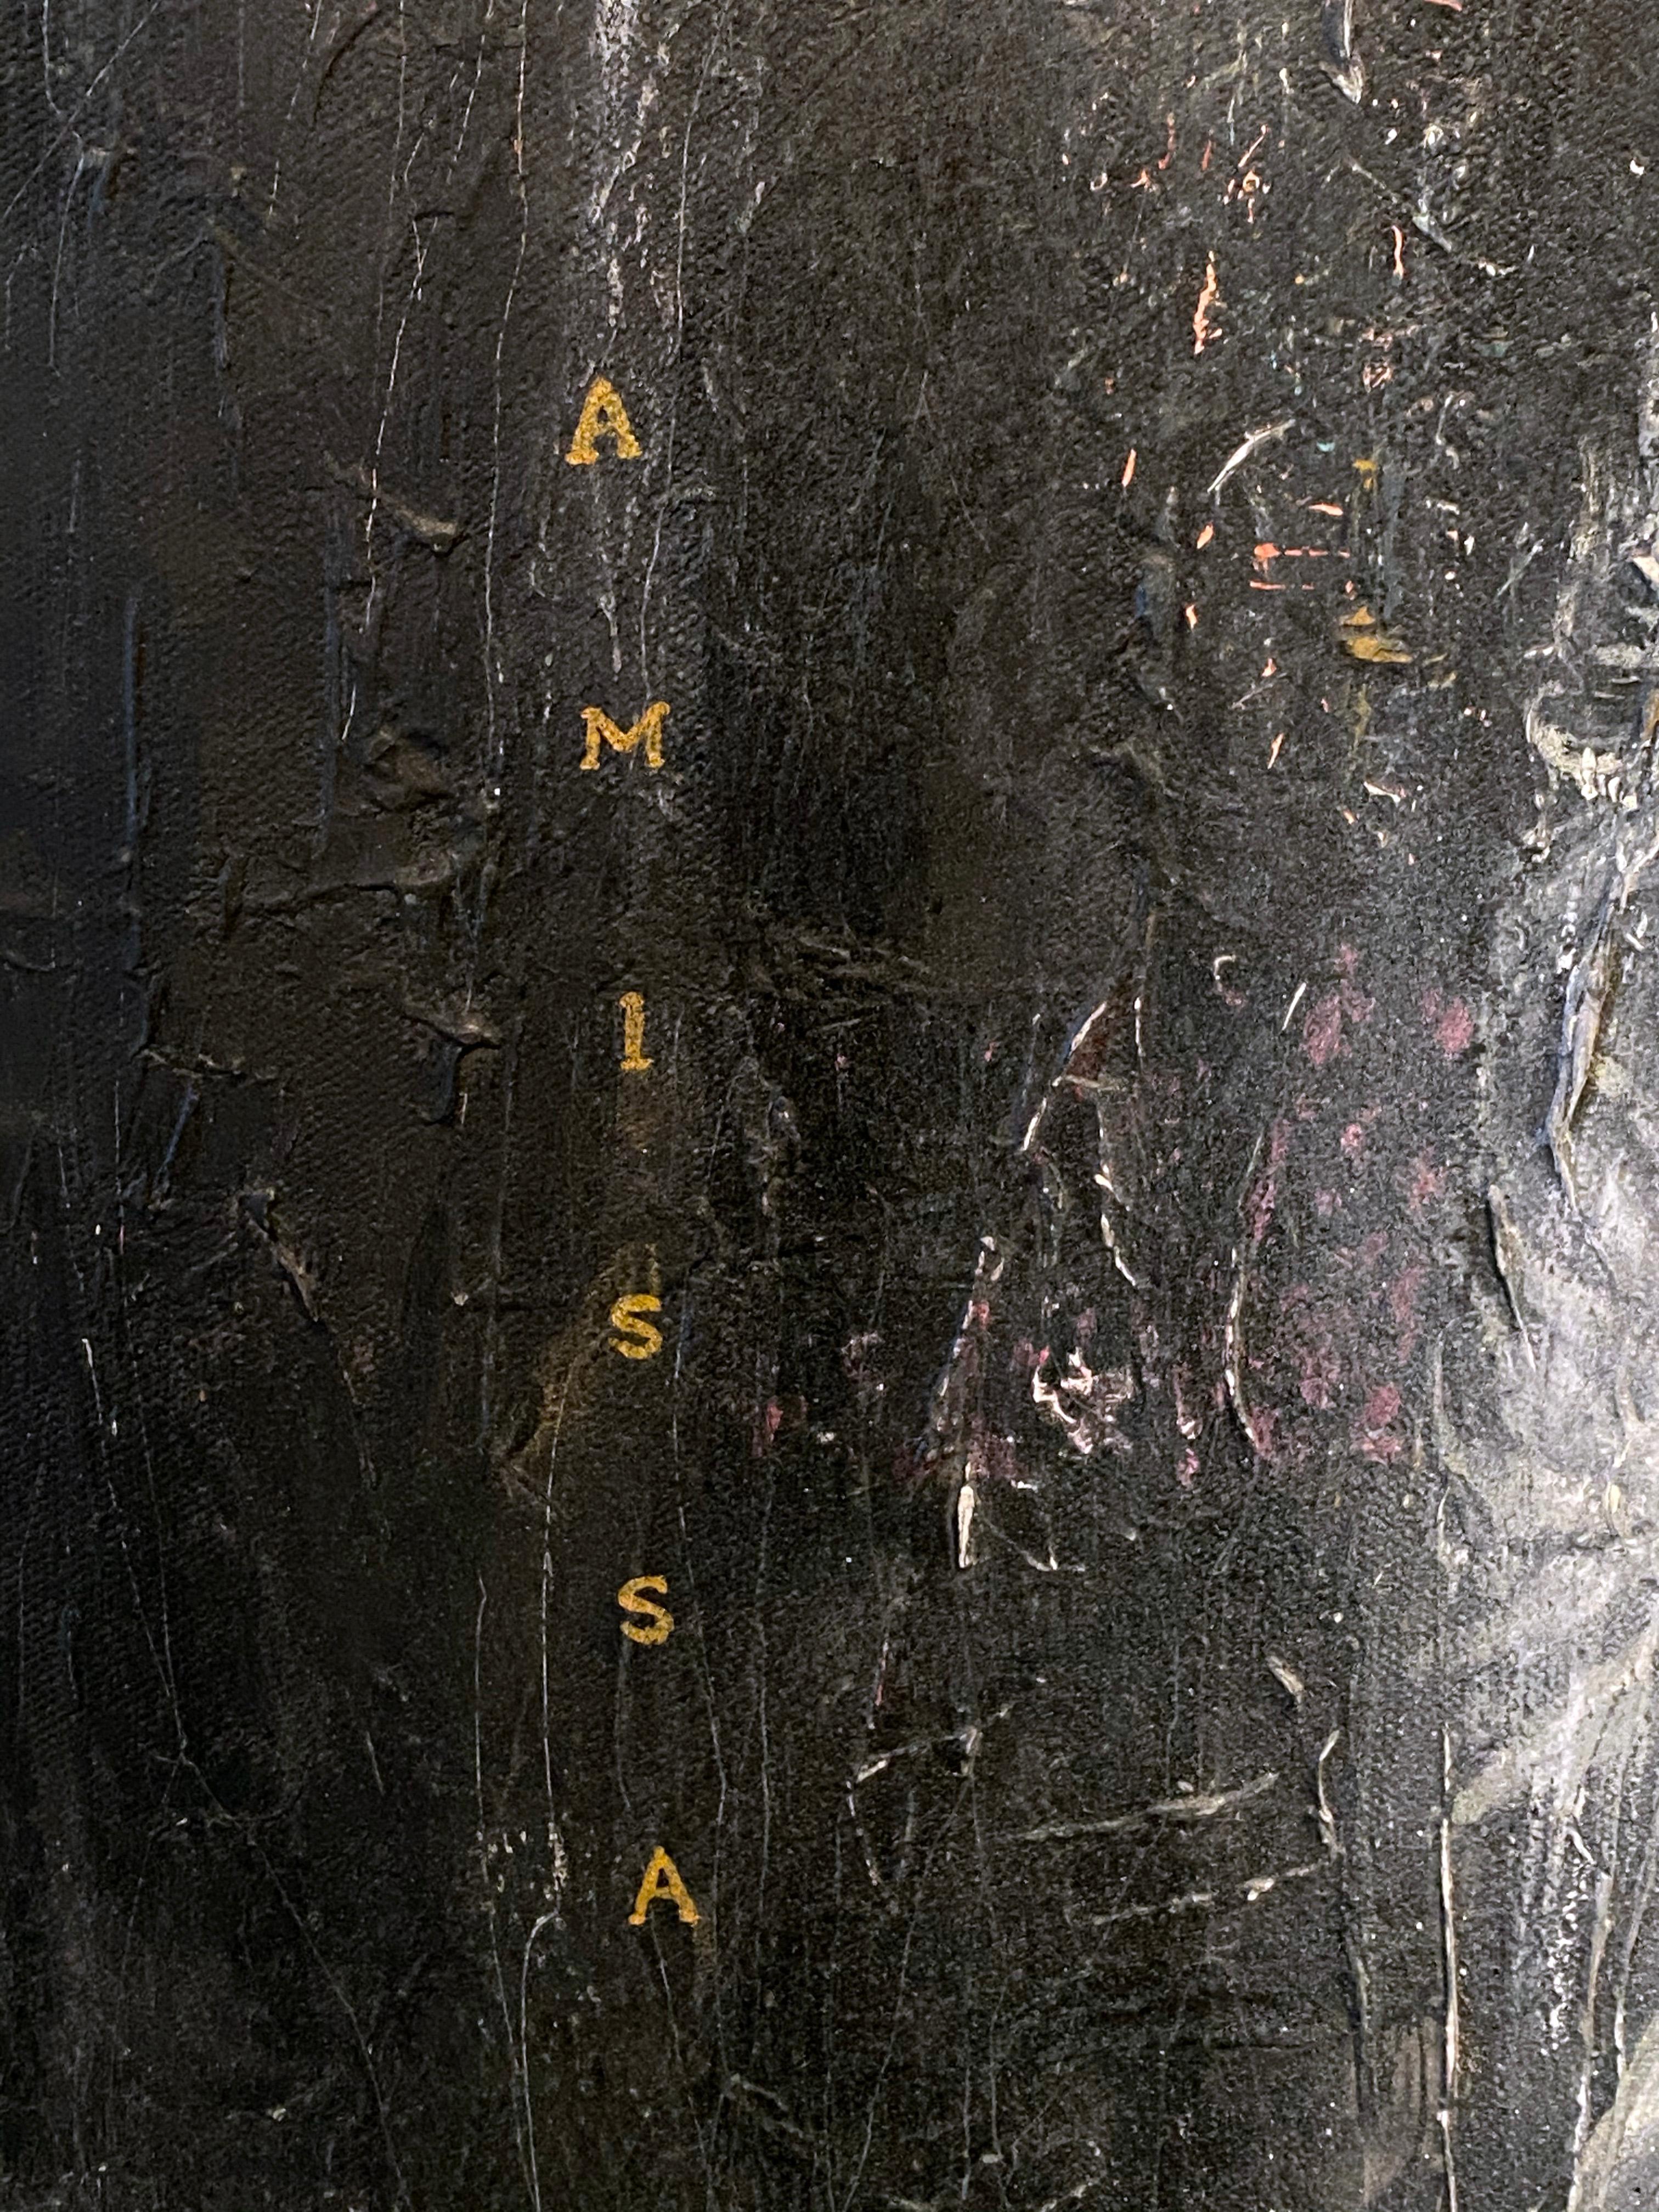 SPECTRE 
2018

A ghostly figure with a gold halo has the words “Amissa” to his right, and “Anima Mea” to his left – hand-painted vertically in gold type. In Latin, “Amissa Anima Mea” translates to “Lost Soul” – and adds to the mysterious nature of